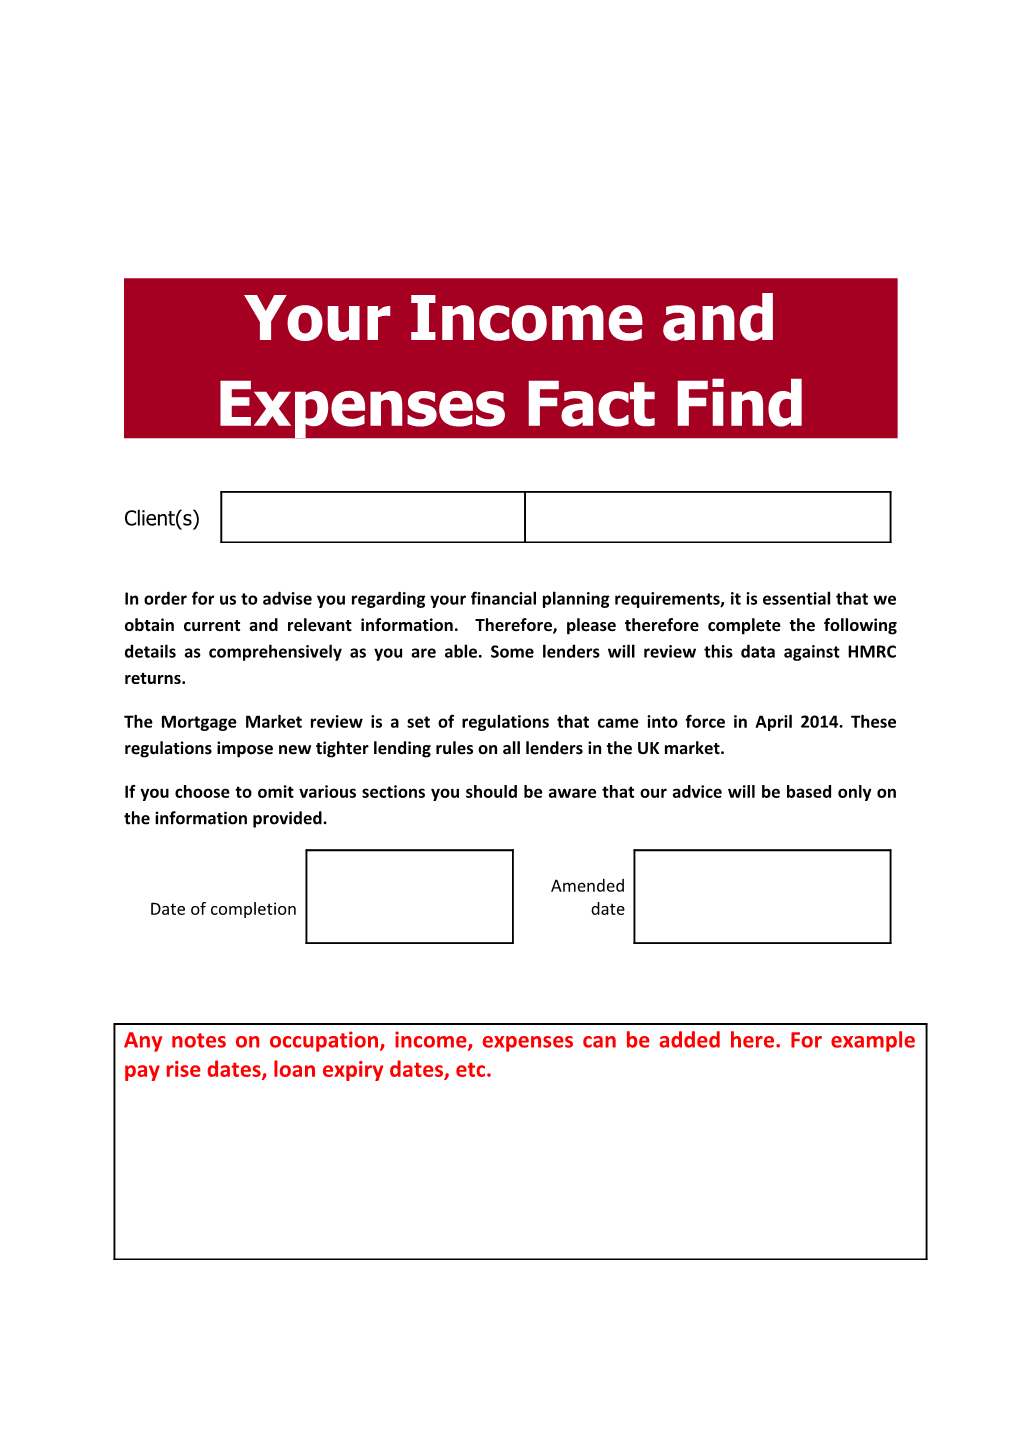 Your Income and Expenses Fact Find